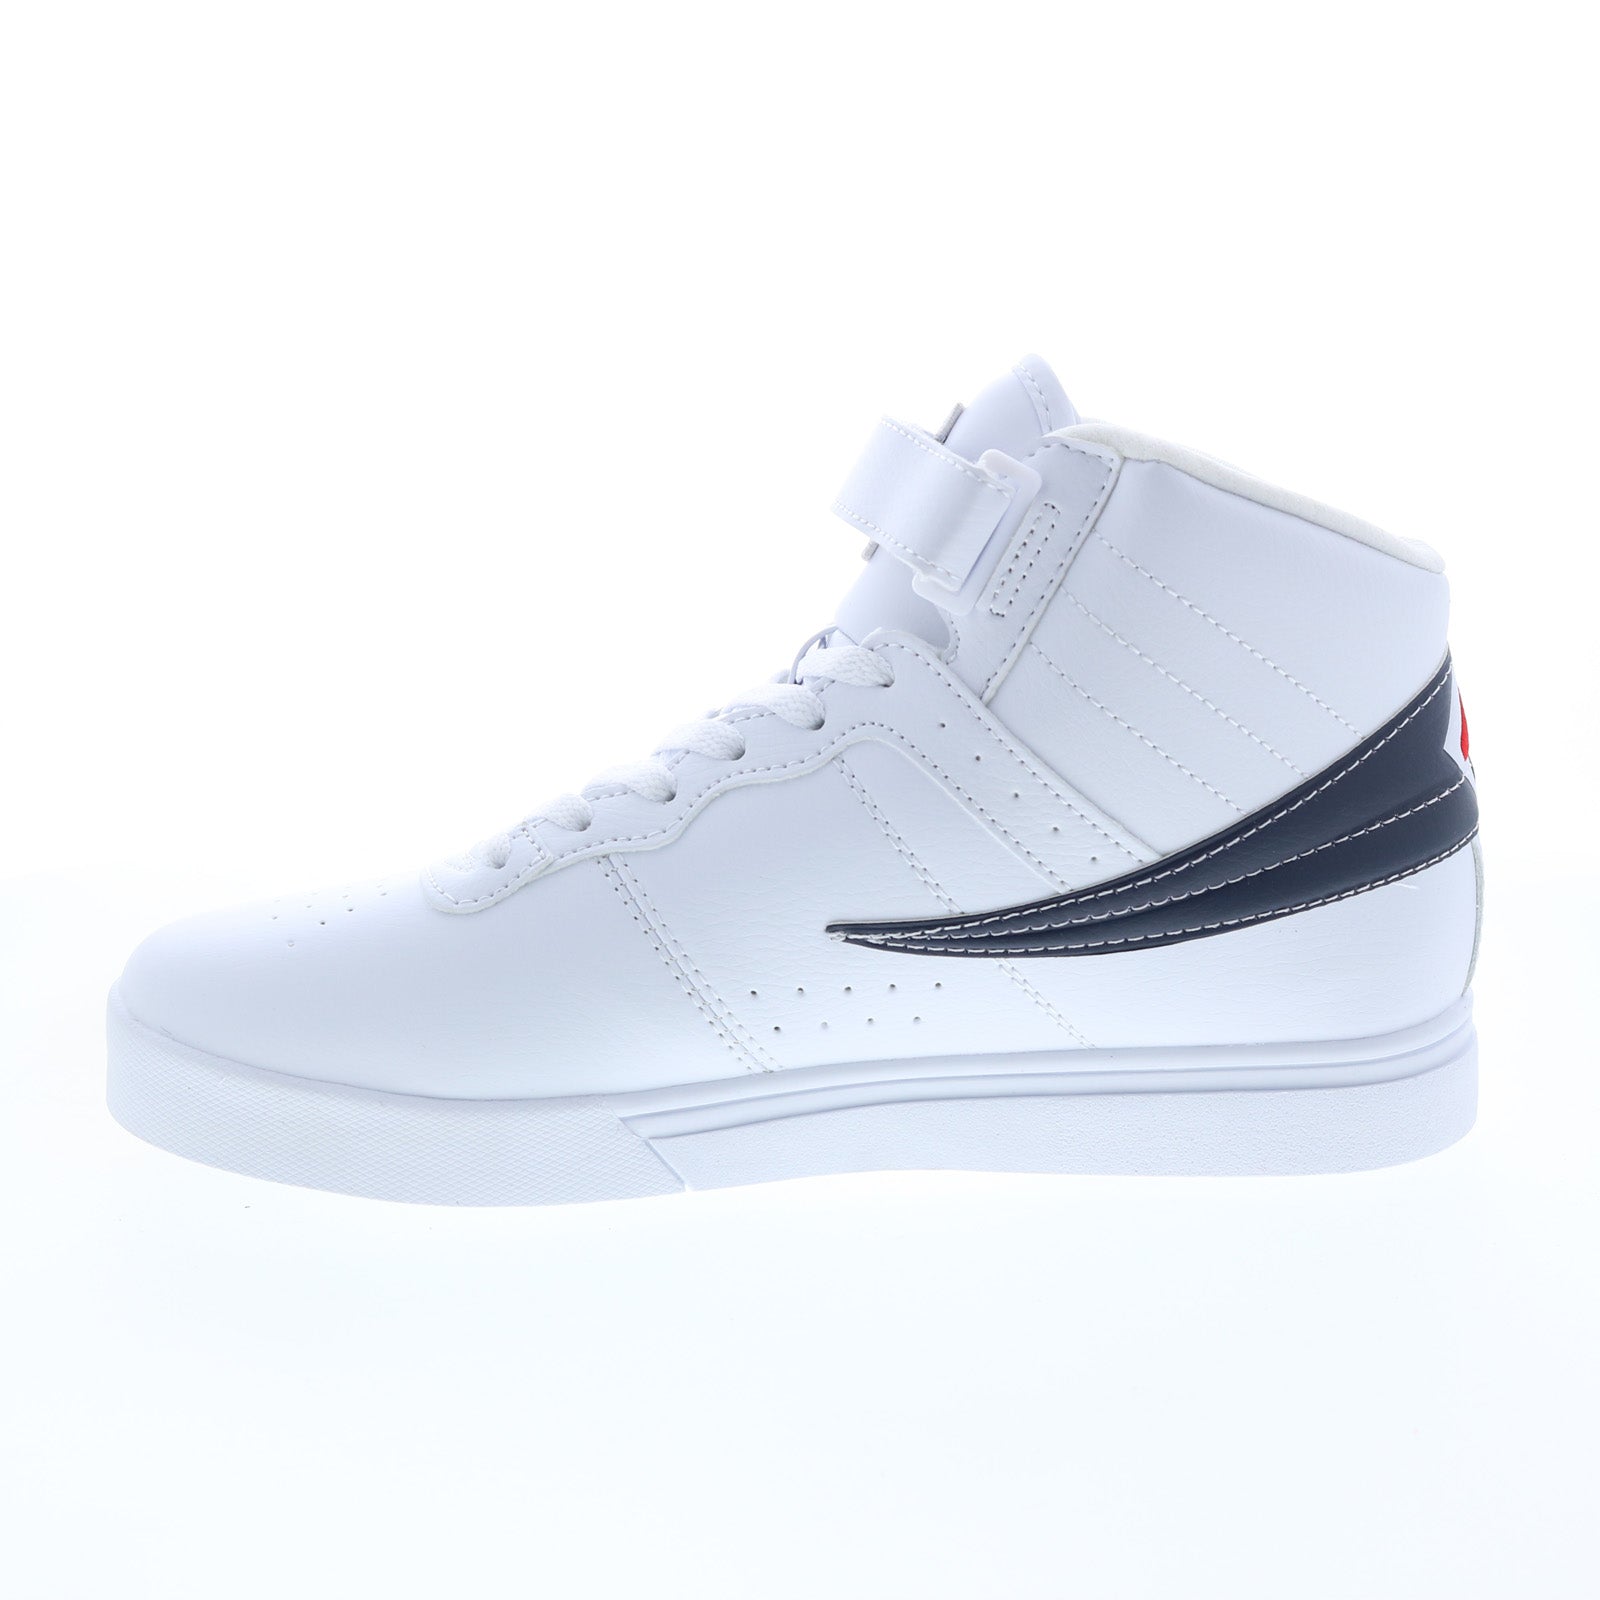 Louis Vuitton Air Force 1 Mid sneakers White Leather US 7 – ＬＯＶＥＬＯＴＳＬＵＸＵＲＹ